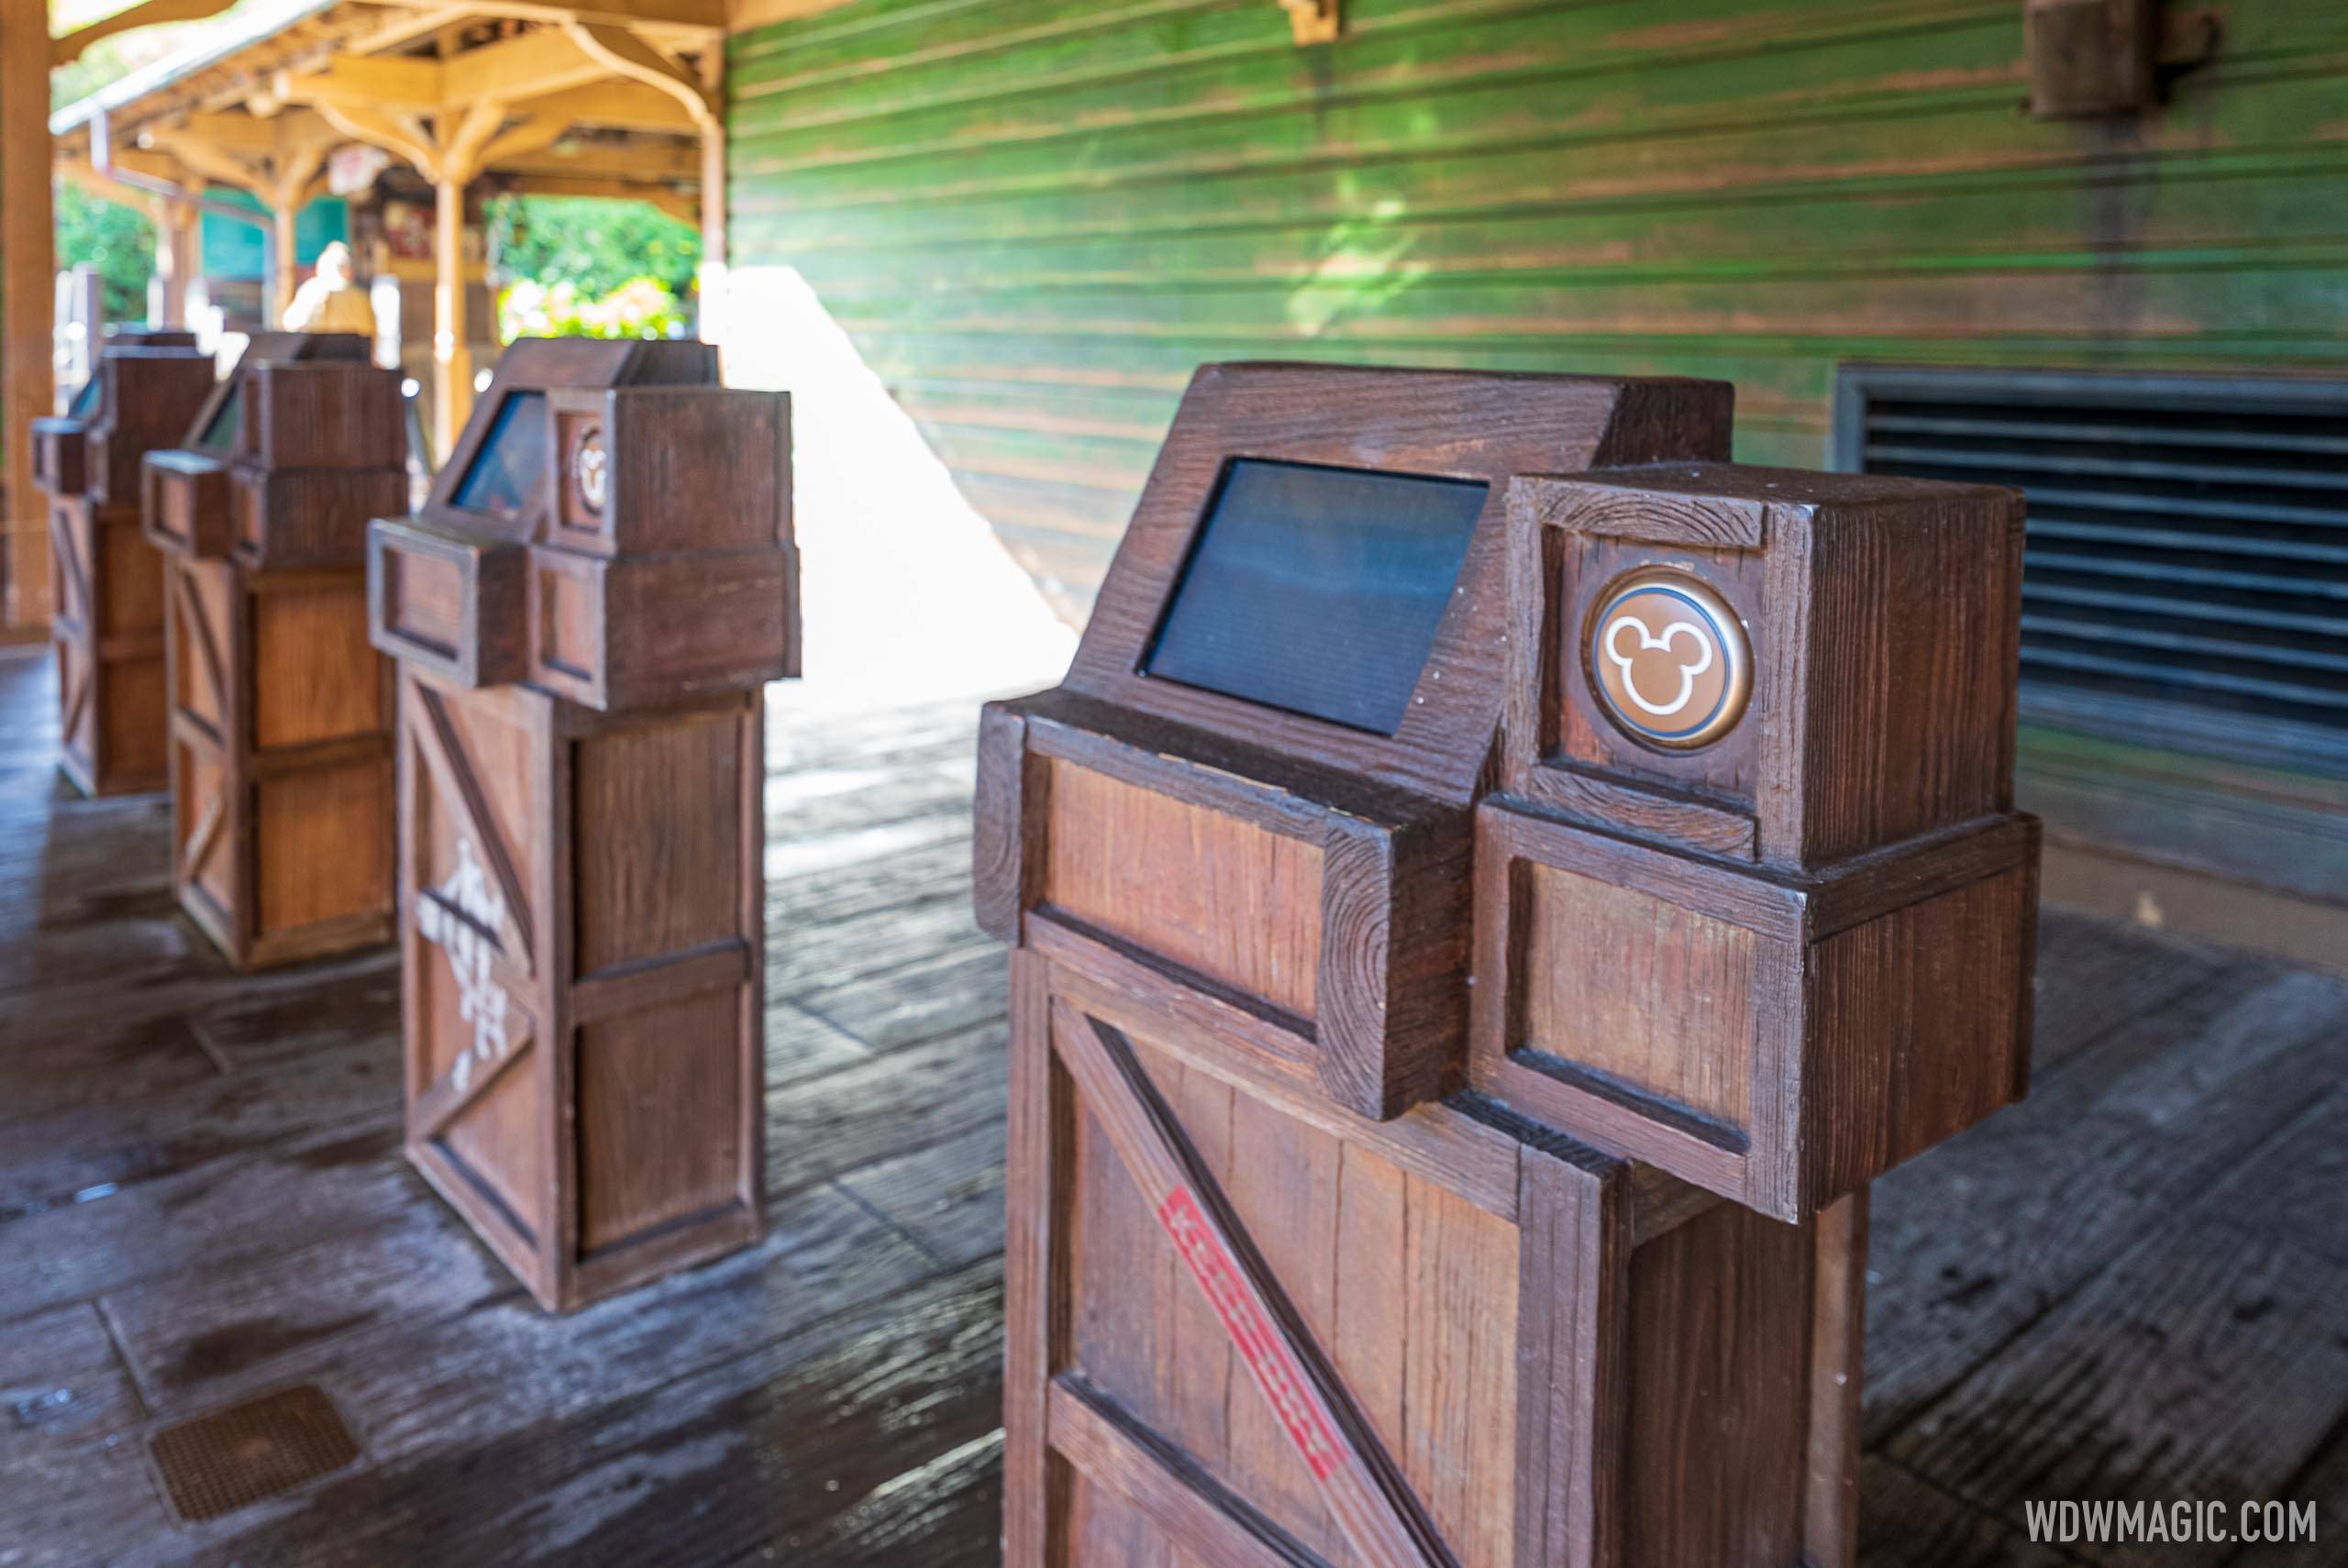 Former FastPass kiosks uncovered in Tomorrowland and Adventureland